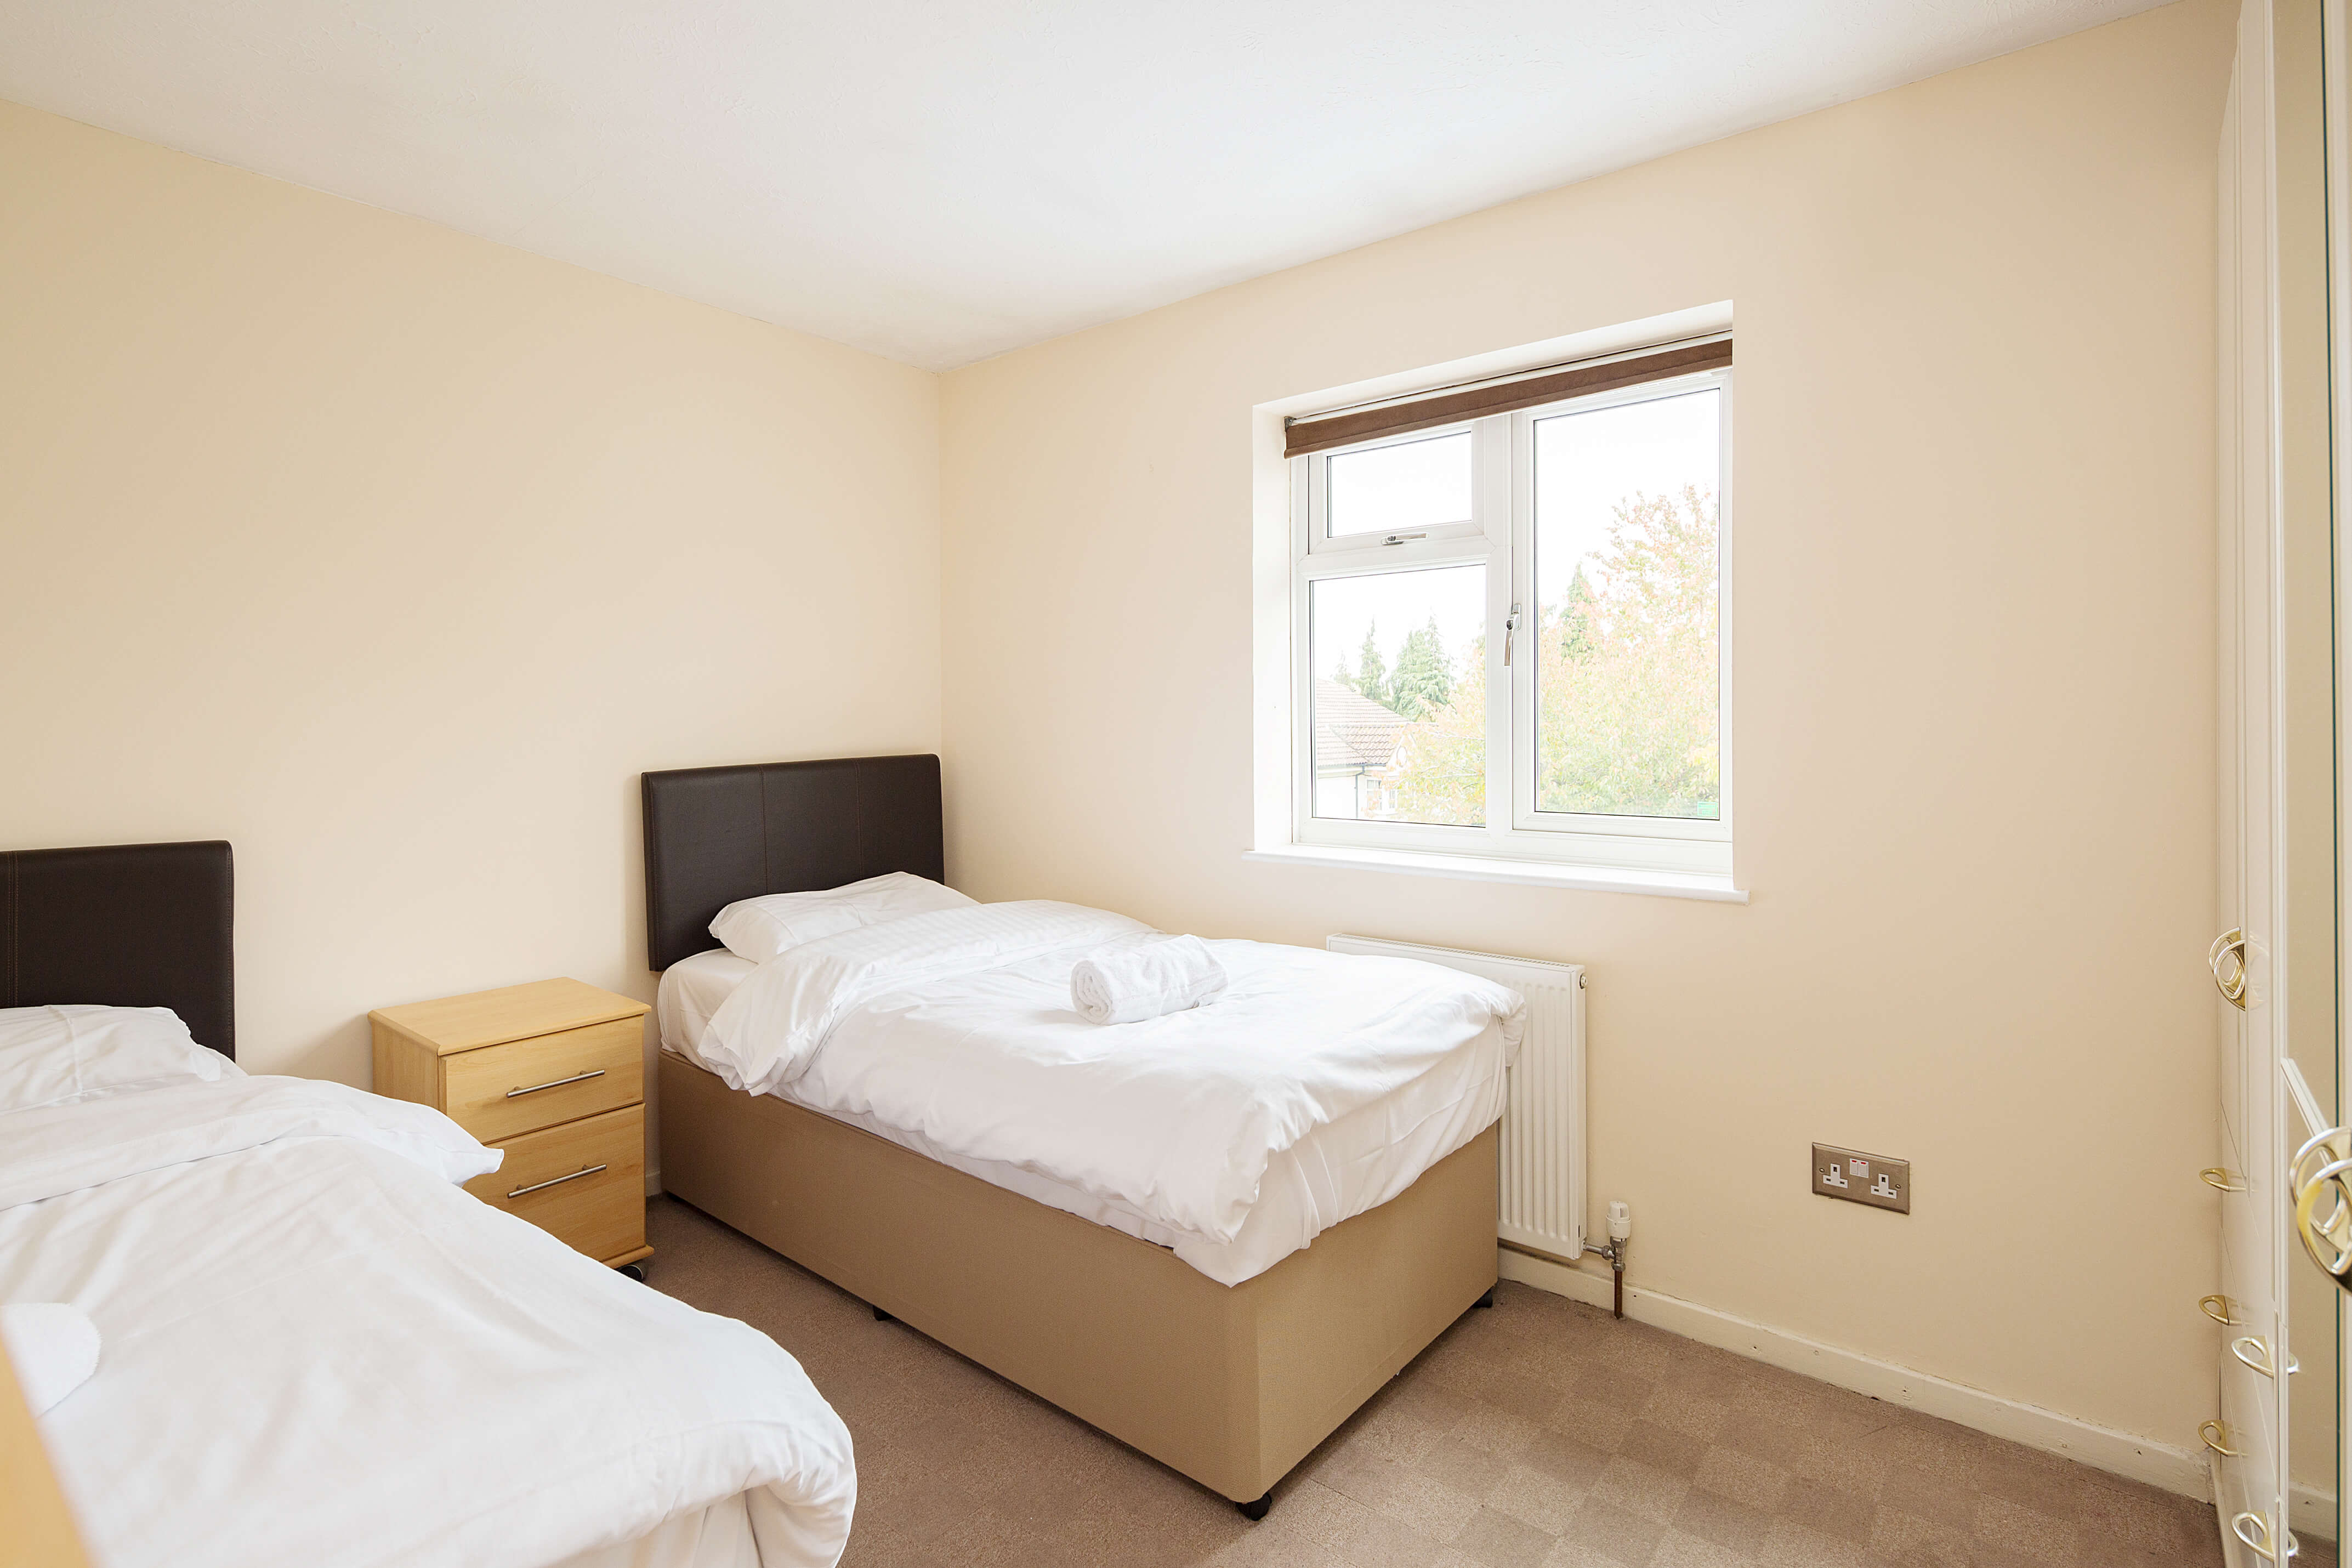 Maidstone-Serviced-Apartments,-UK---The-Valley-HouseI-Book-Short-Let-Apartments-in-Maidenstone-!-Free-Parking-&-Fully-Equipped-Kitchen-I-Available-Now!